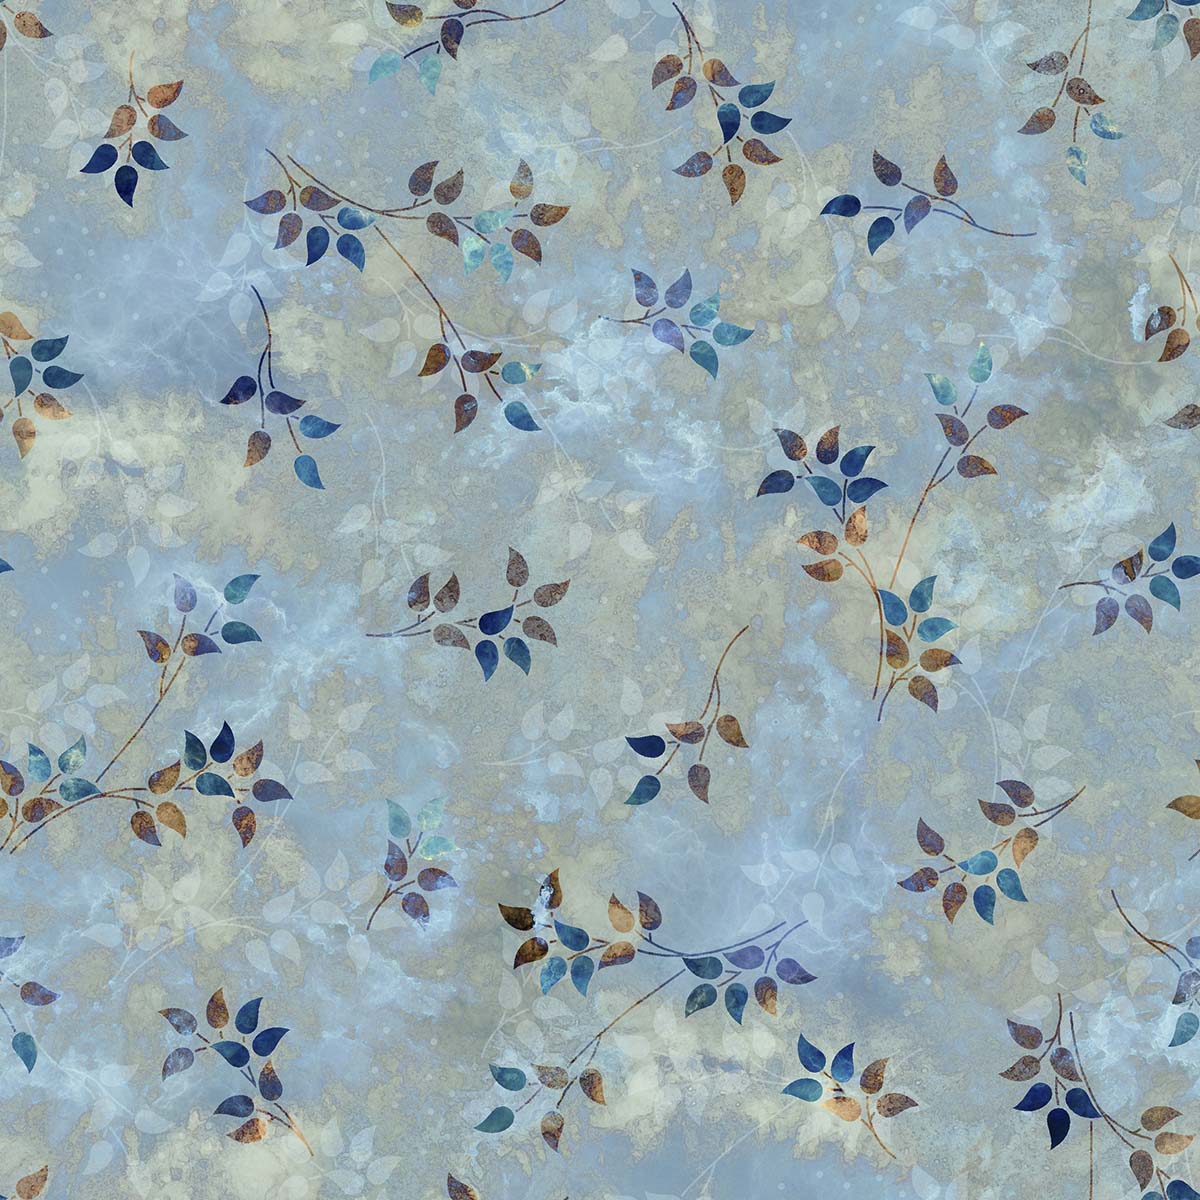 A pattern of leaves on a blue background